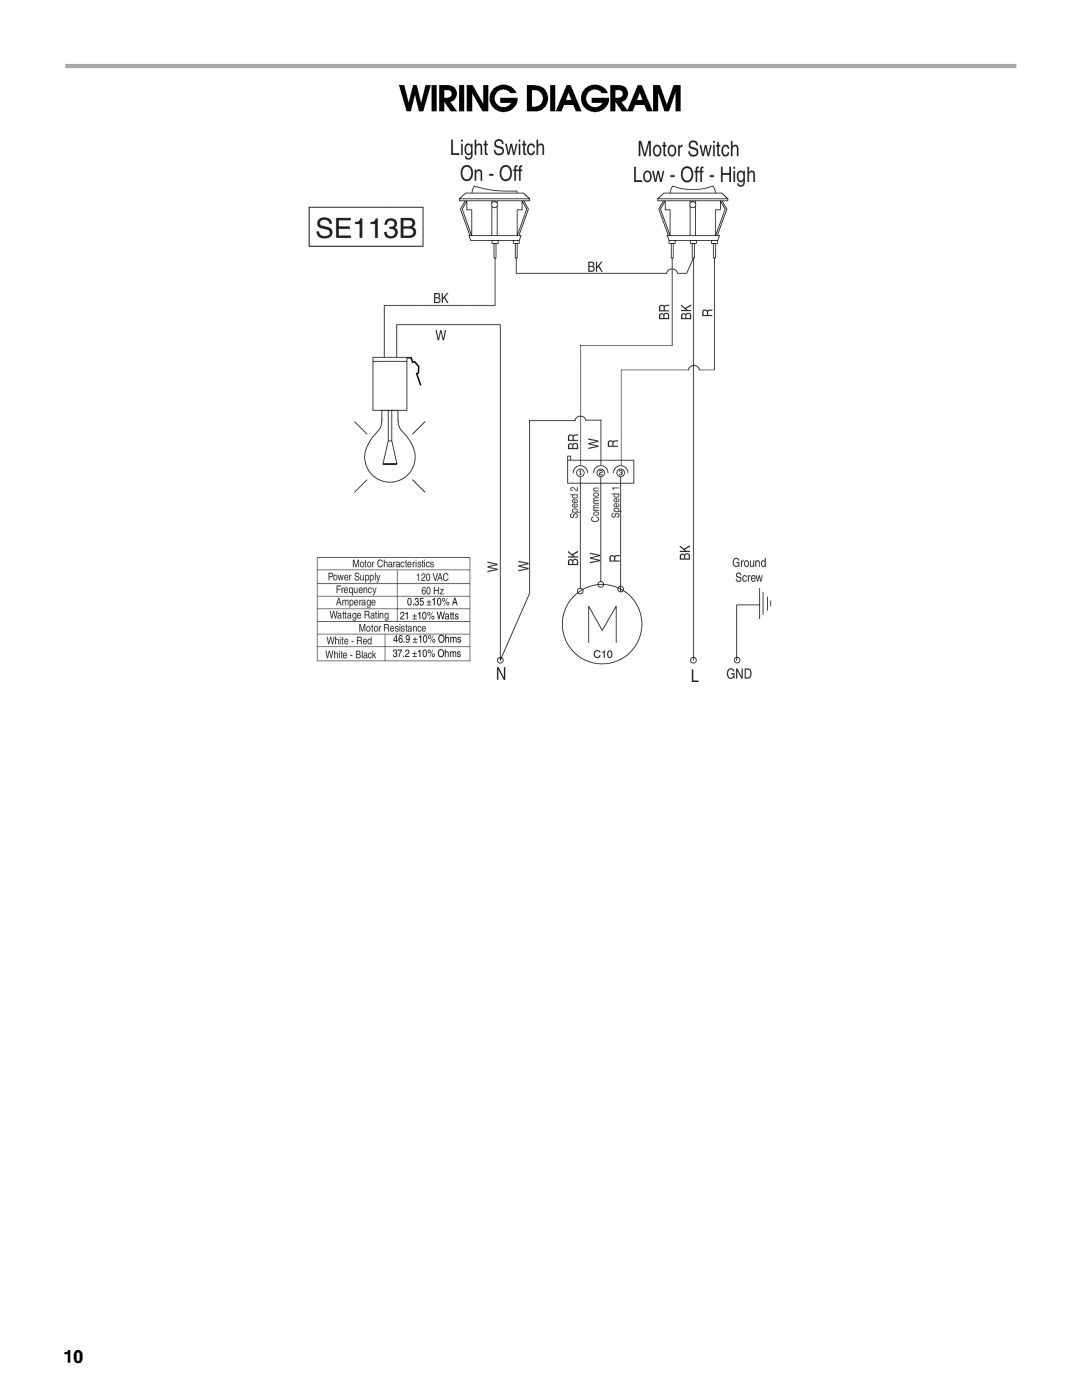 Whirlpool UXT4036AY, UXT4030AYS Wiring Diagram, SE113B, Light Switch, On - Off, Low - Off - High, Motor Switch 